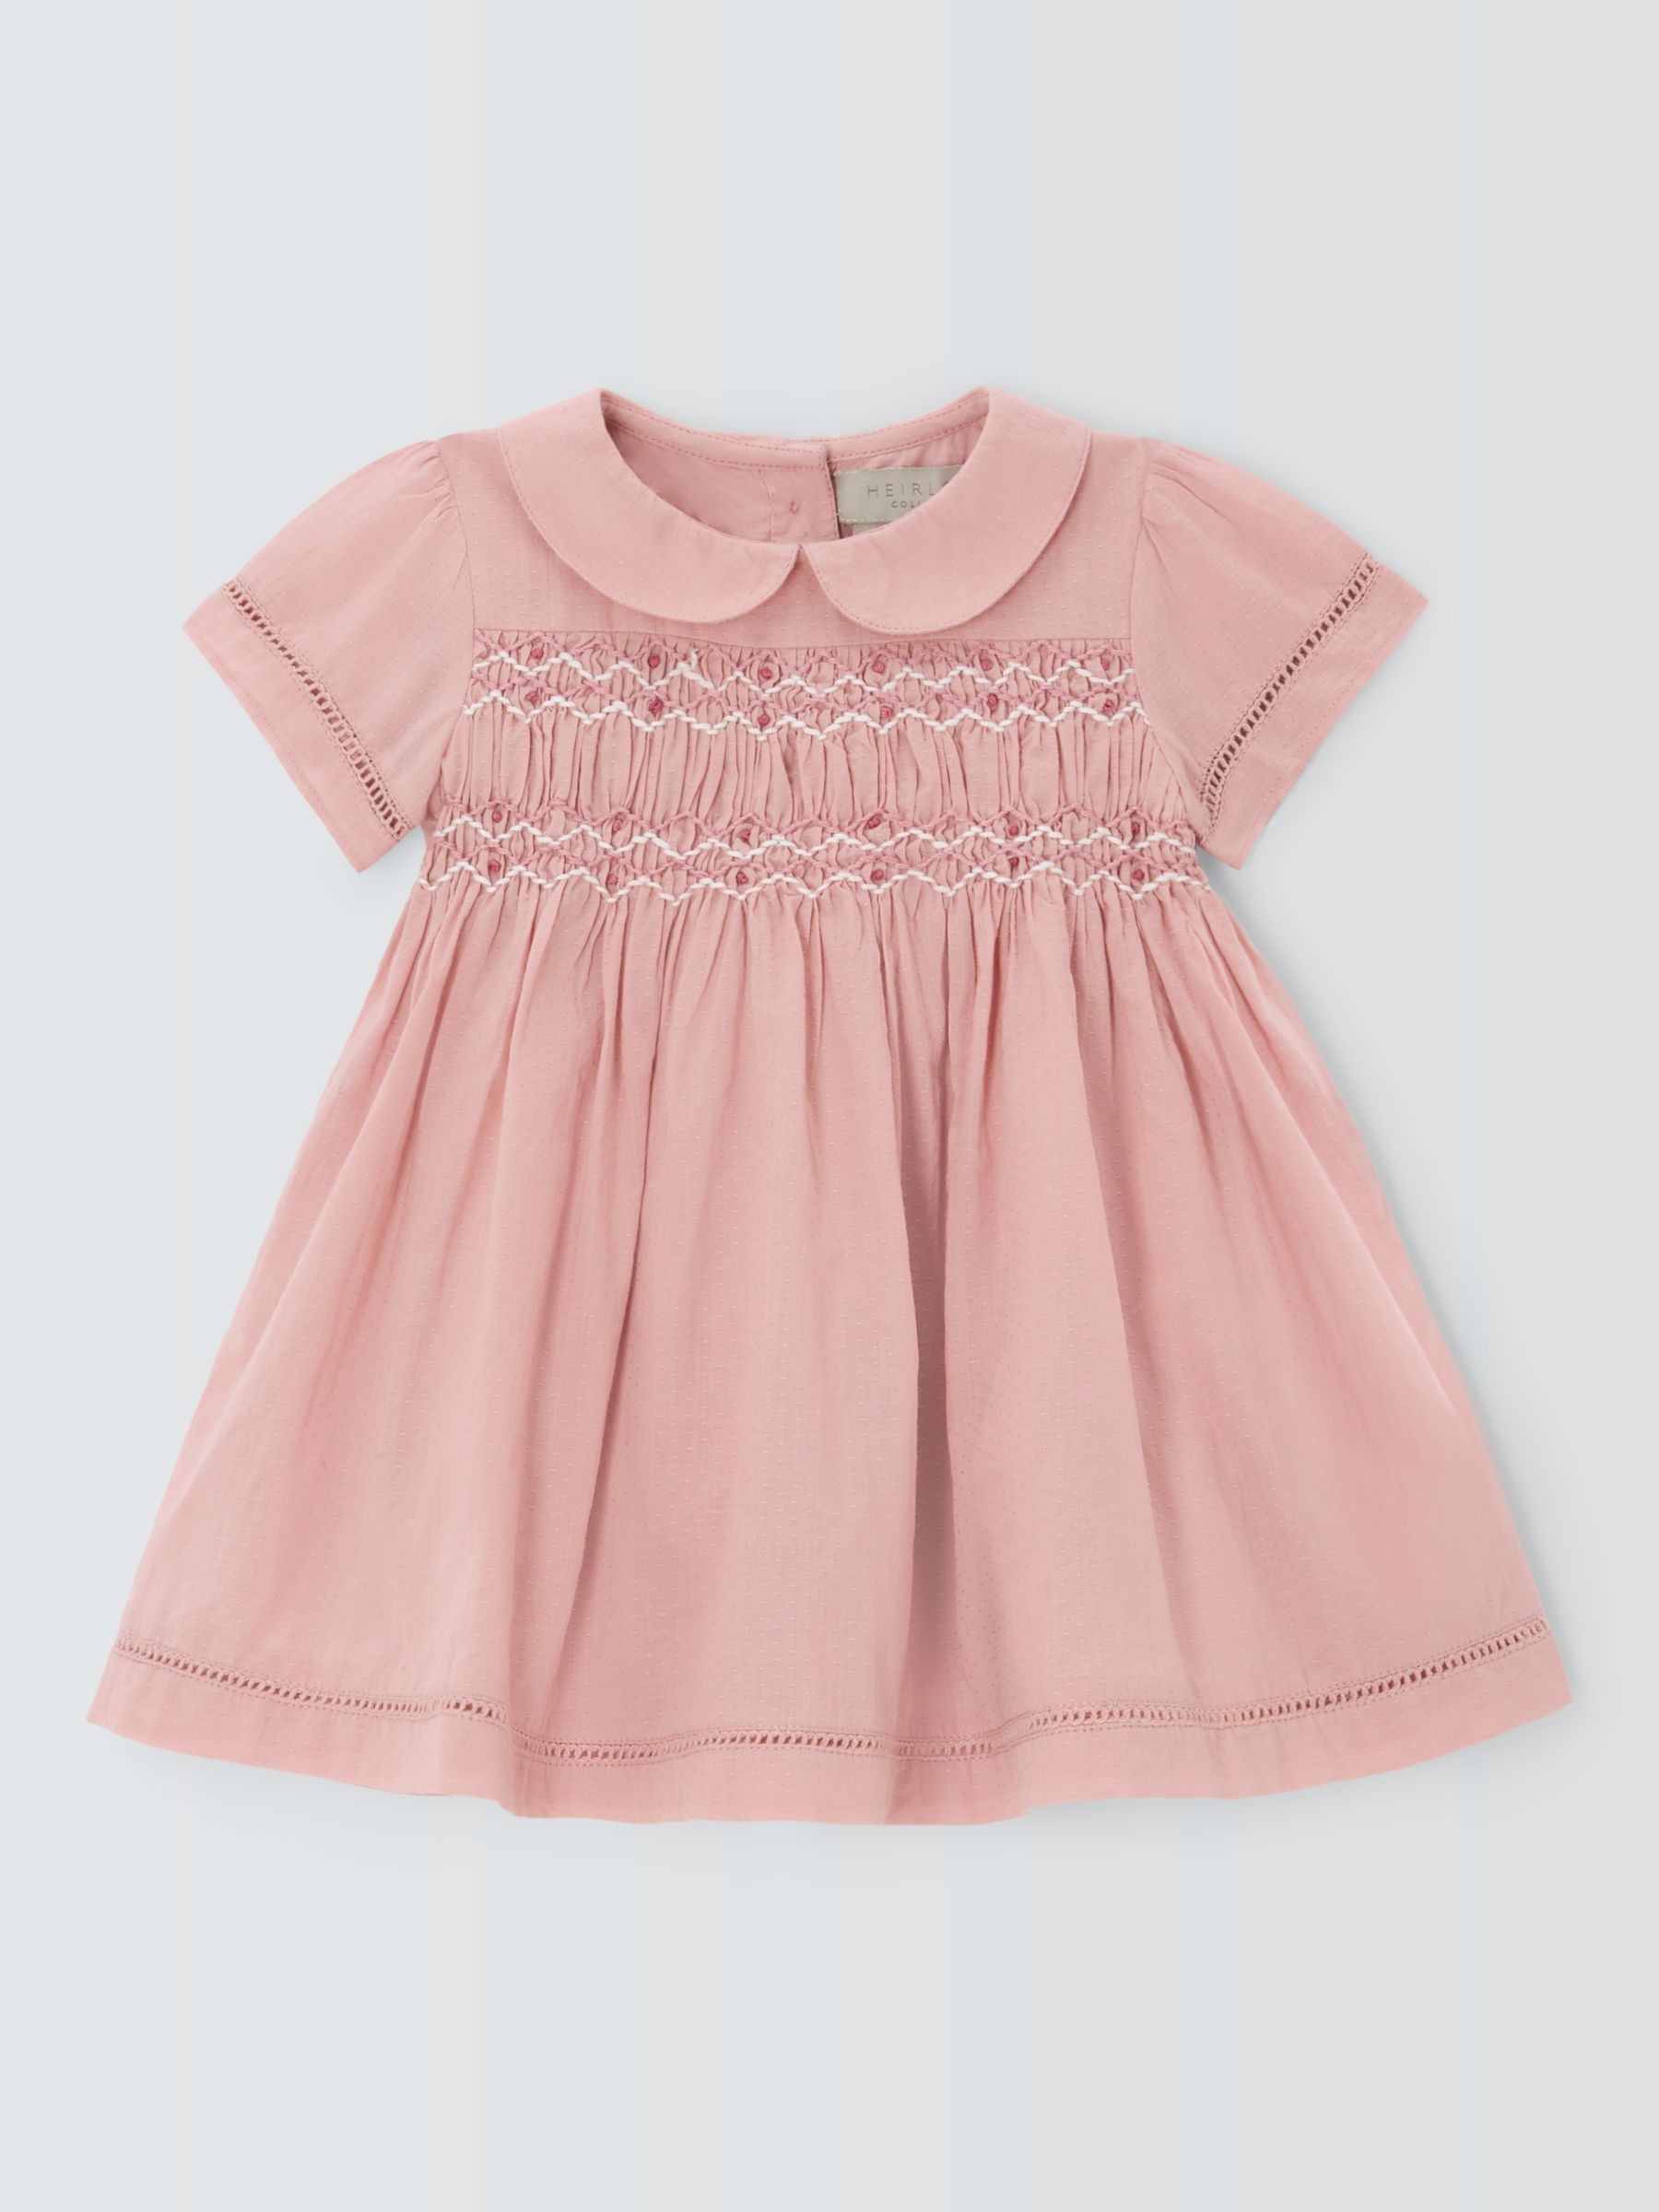 John Lewis Heirloom Collection Baby Dobby Smocked Dress, Pink, 0-3 months